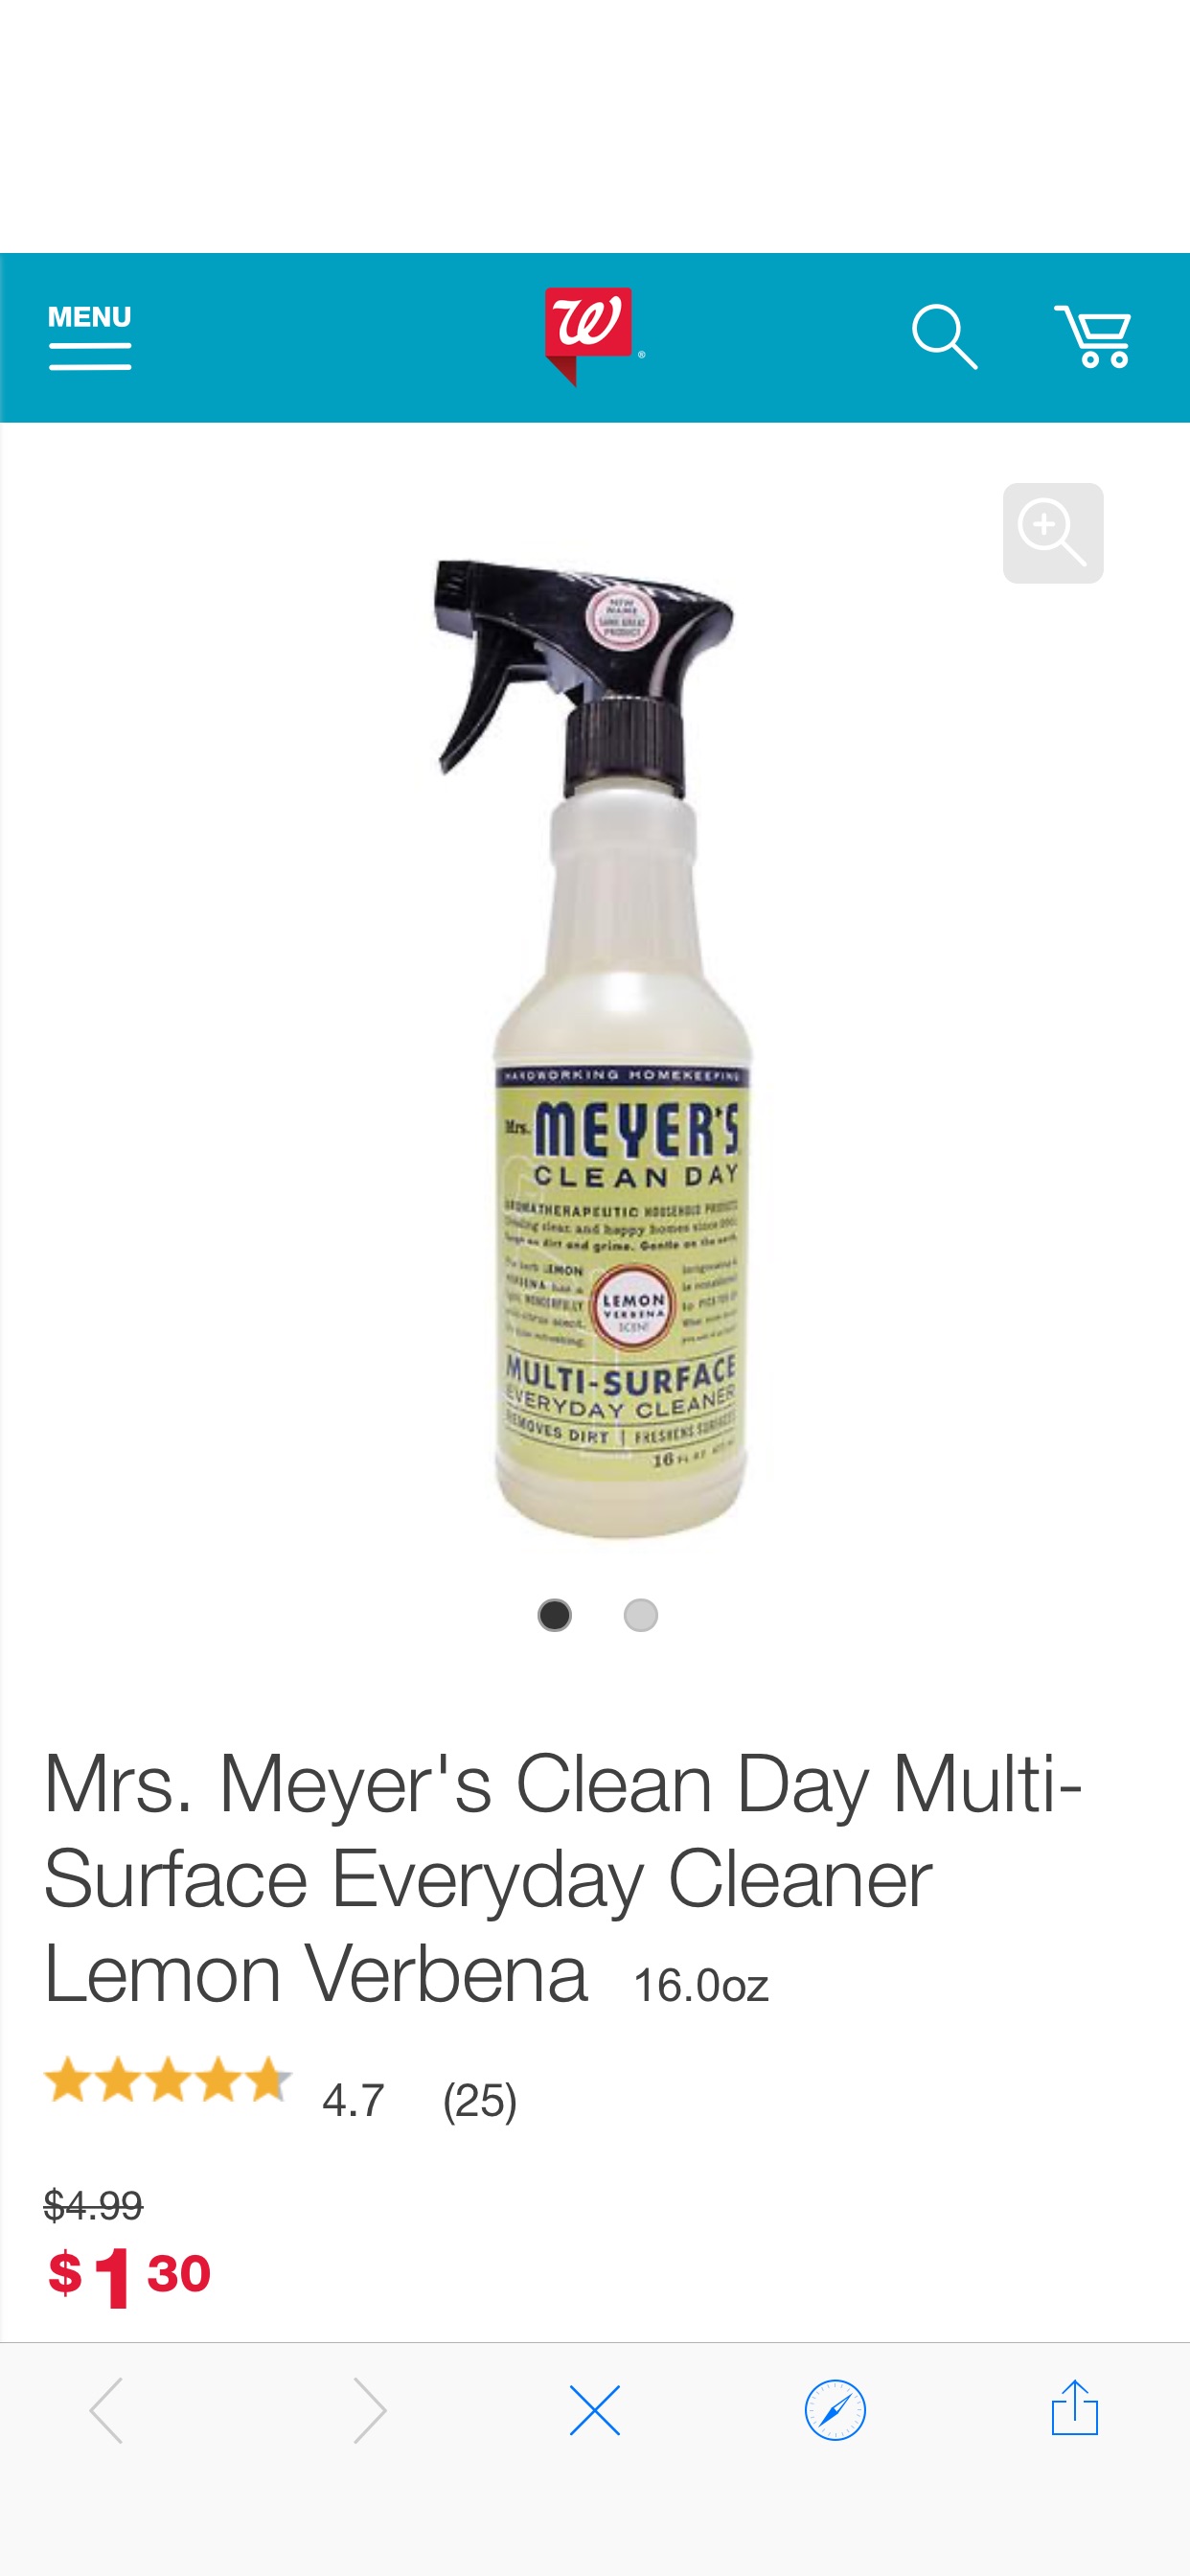 Mrs. Meyer's Clean Day Multi-Surface Everyday Cleaner 表面清洁液